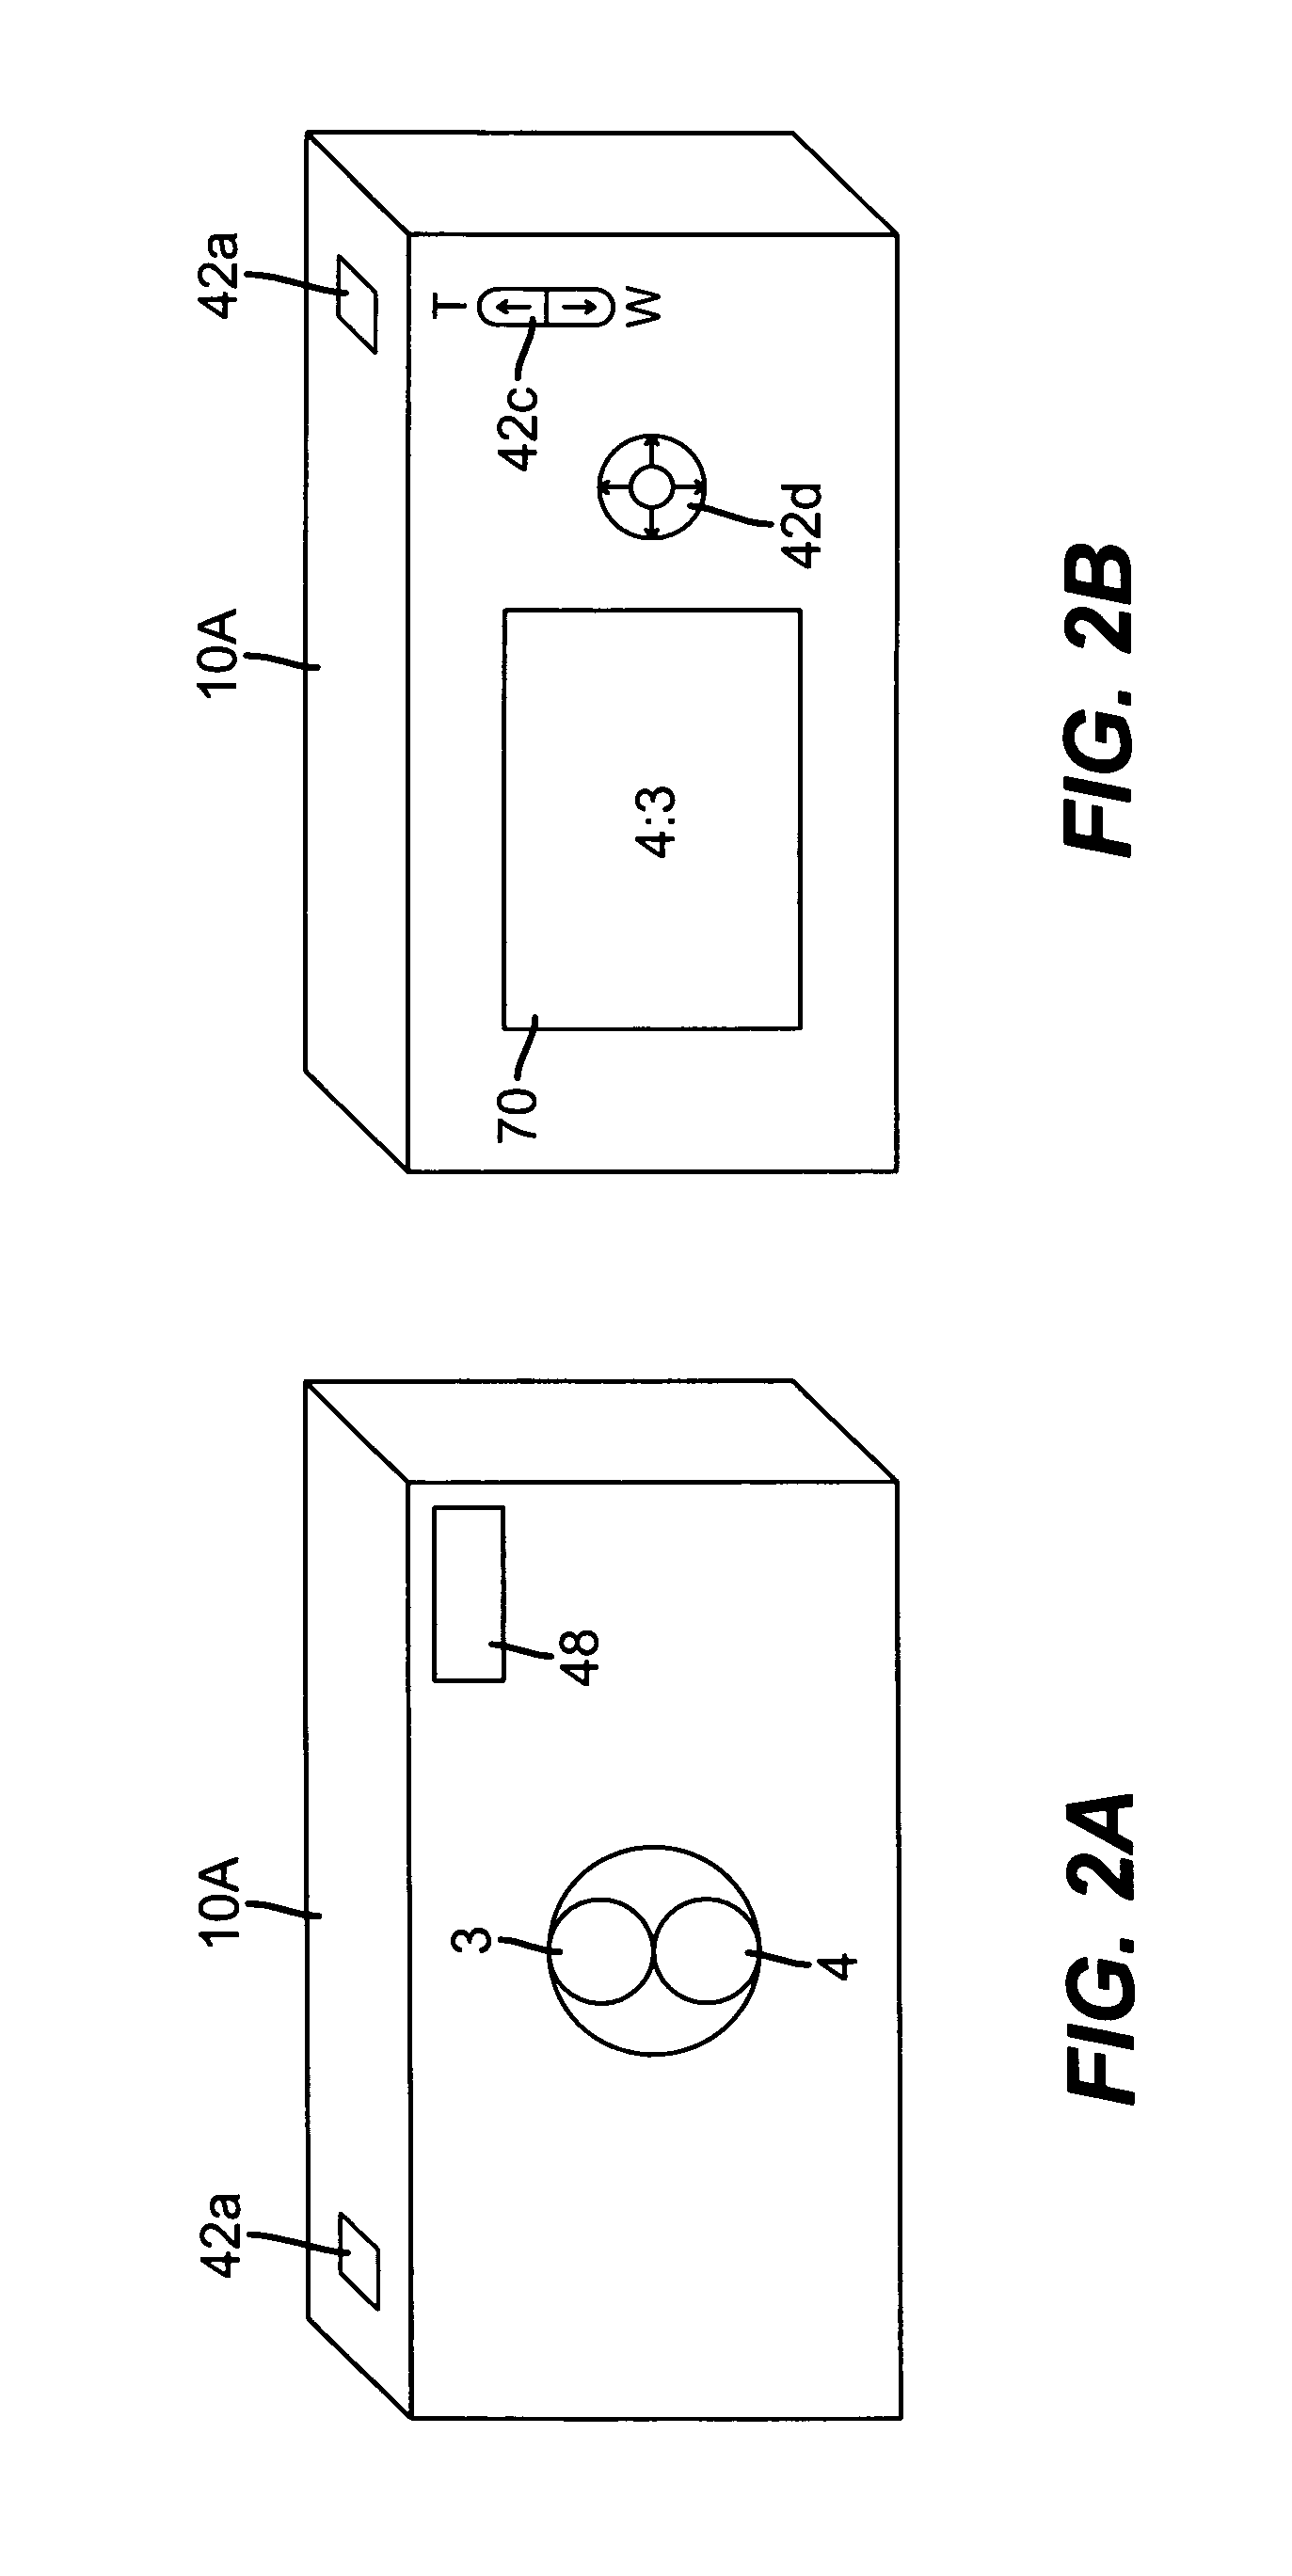 Camera using multiple lenses and image sensors in a rangefinder configuration to provide a range map